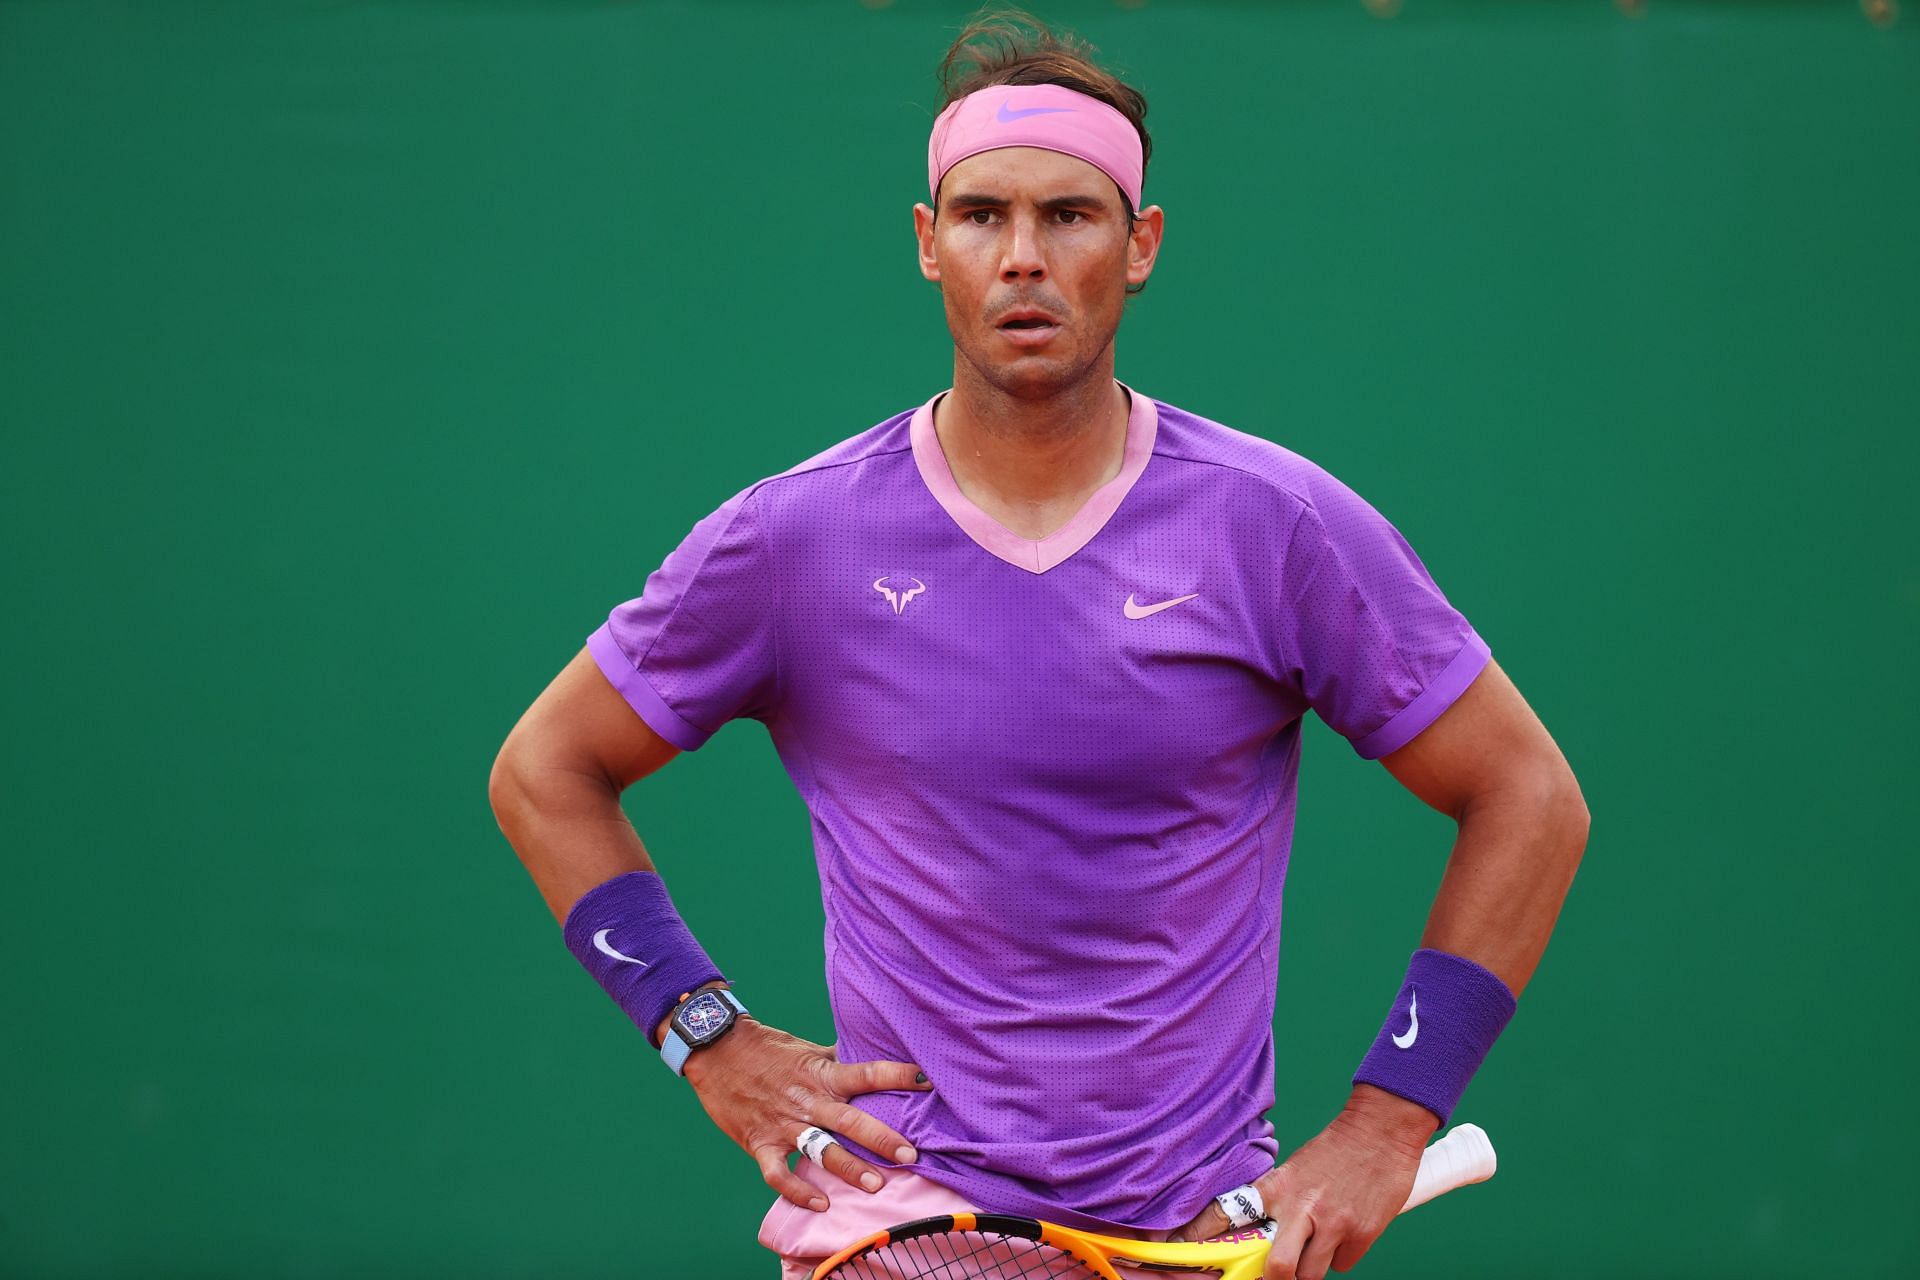 Rafael Nadal reached the third round in Hamburg and Monte-Carlo as a 16-year-old